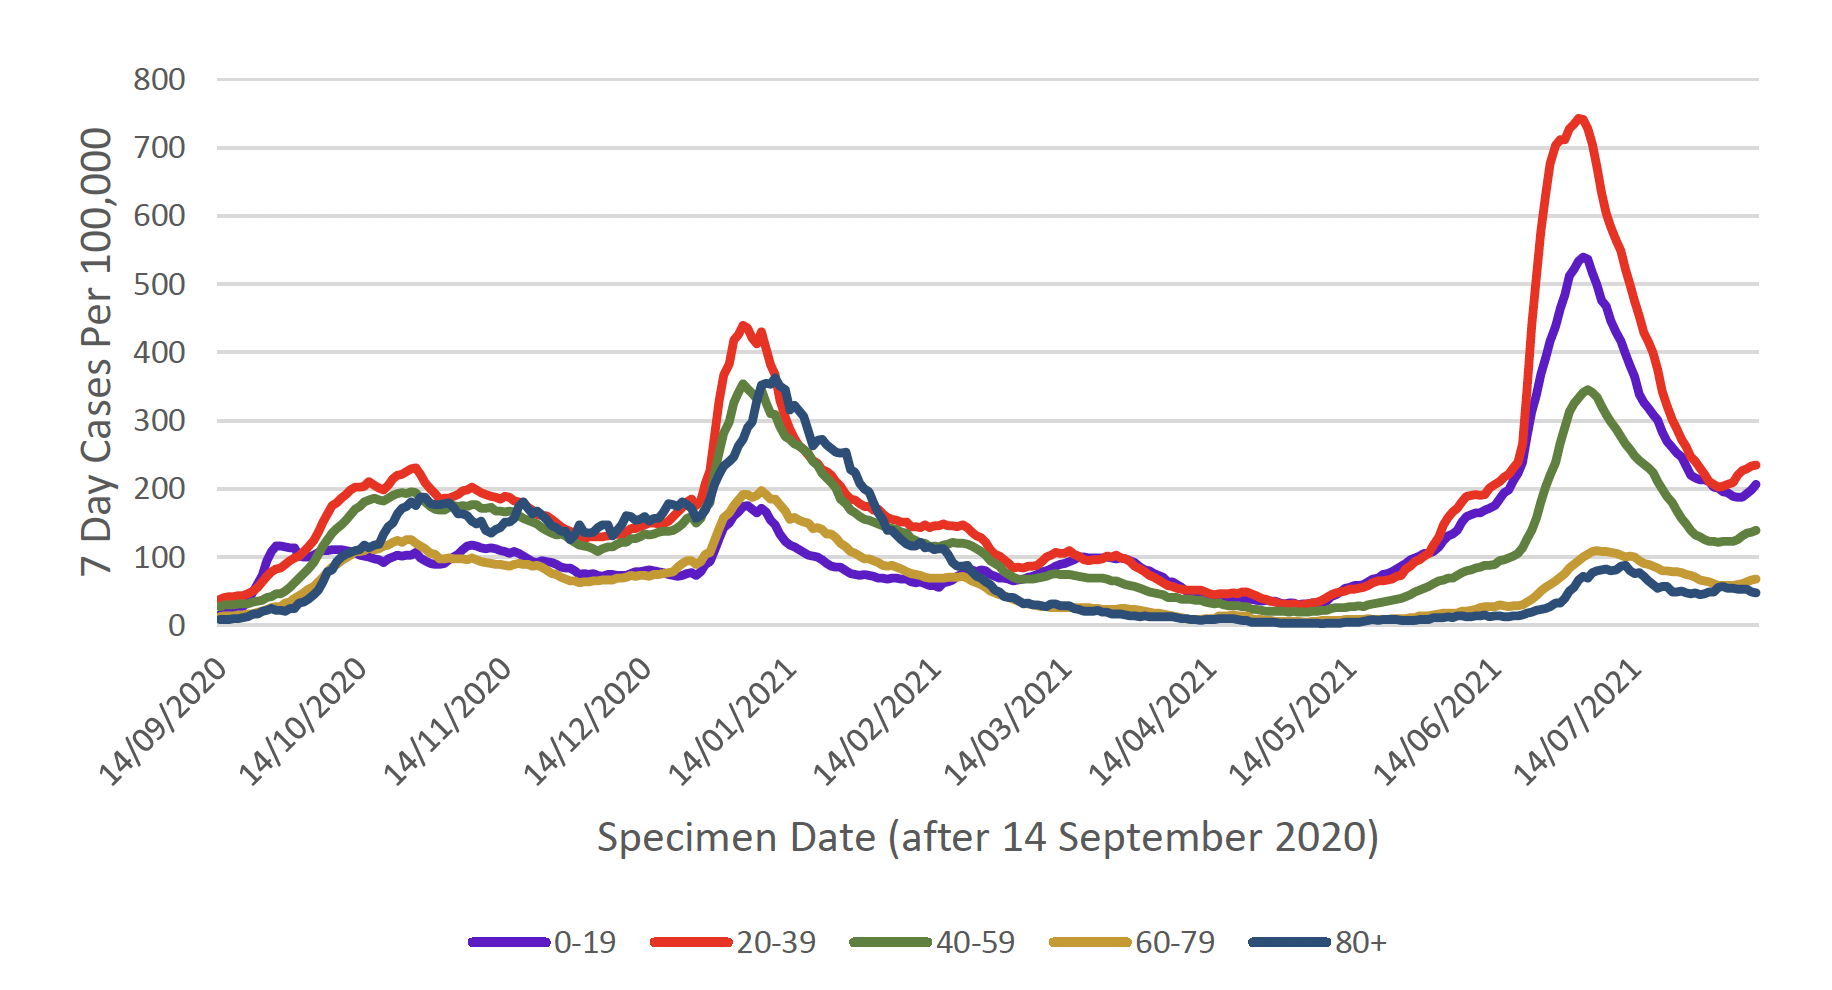 This line graph shows weekly cases per 100,000 people for five different age bands over time, from mid-September 2020. Each age band shows a similar trend with a peak in cases in January, with the 20 to 39 age band having the highest case rate, and the under 20 age band having the lowest case rate. Case rates reduced in all age groups from this peak and then started to increase again sharply from mid-May, reaching a peak at the beginning of July. 7 day cases per 100,000 population then started to decrease sharply afterwards. In the week to the 9th August, case rates have gone up amongst most age bands, with a slight decline in the over 80s.